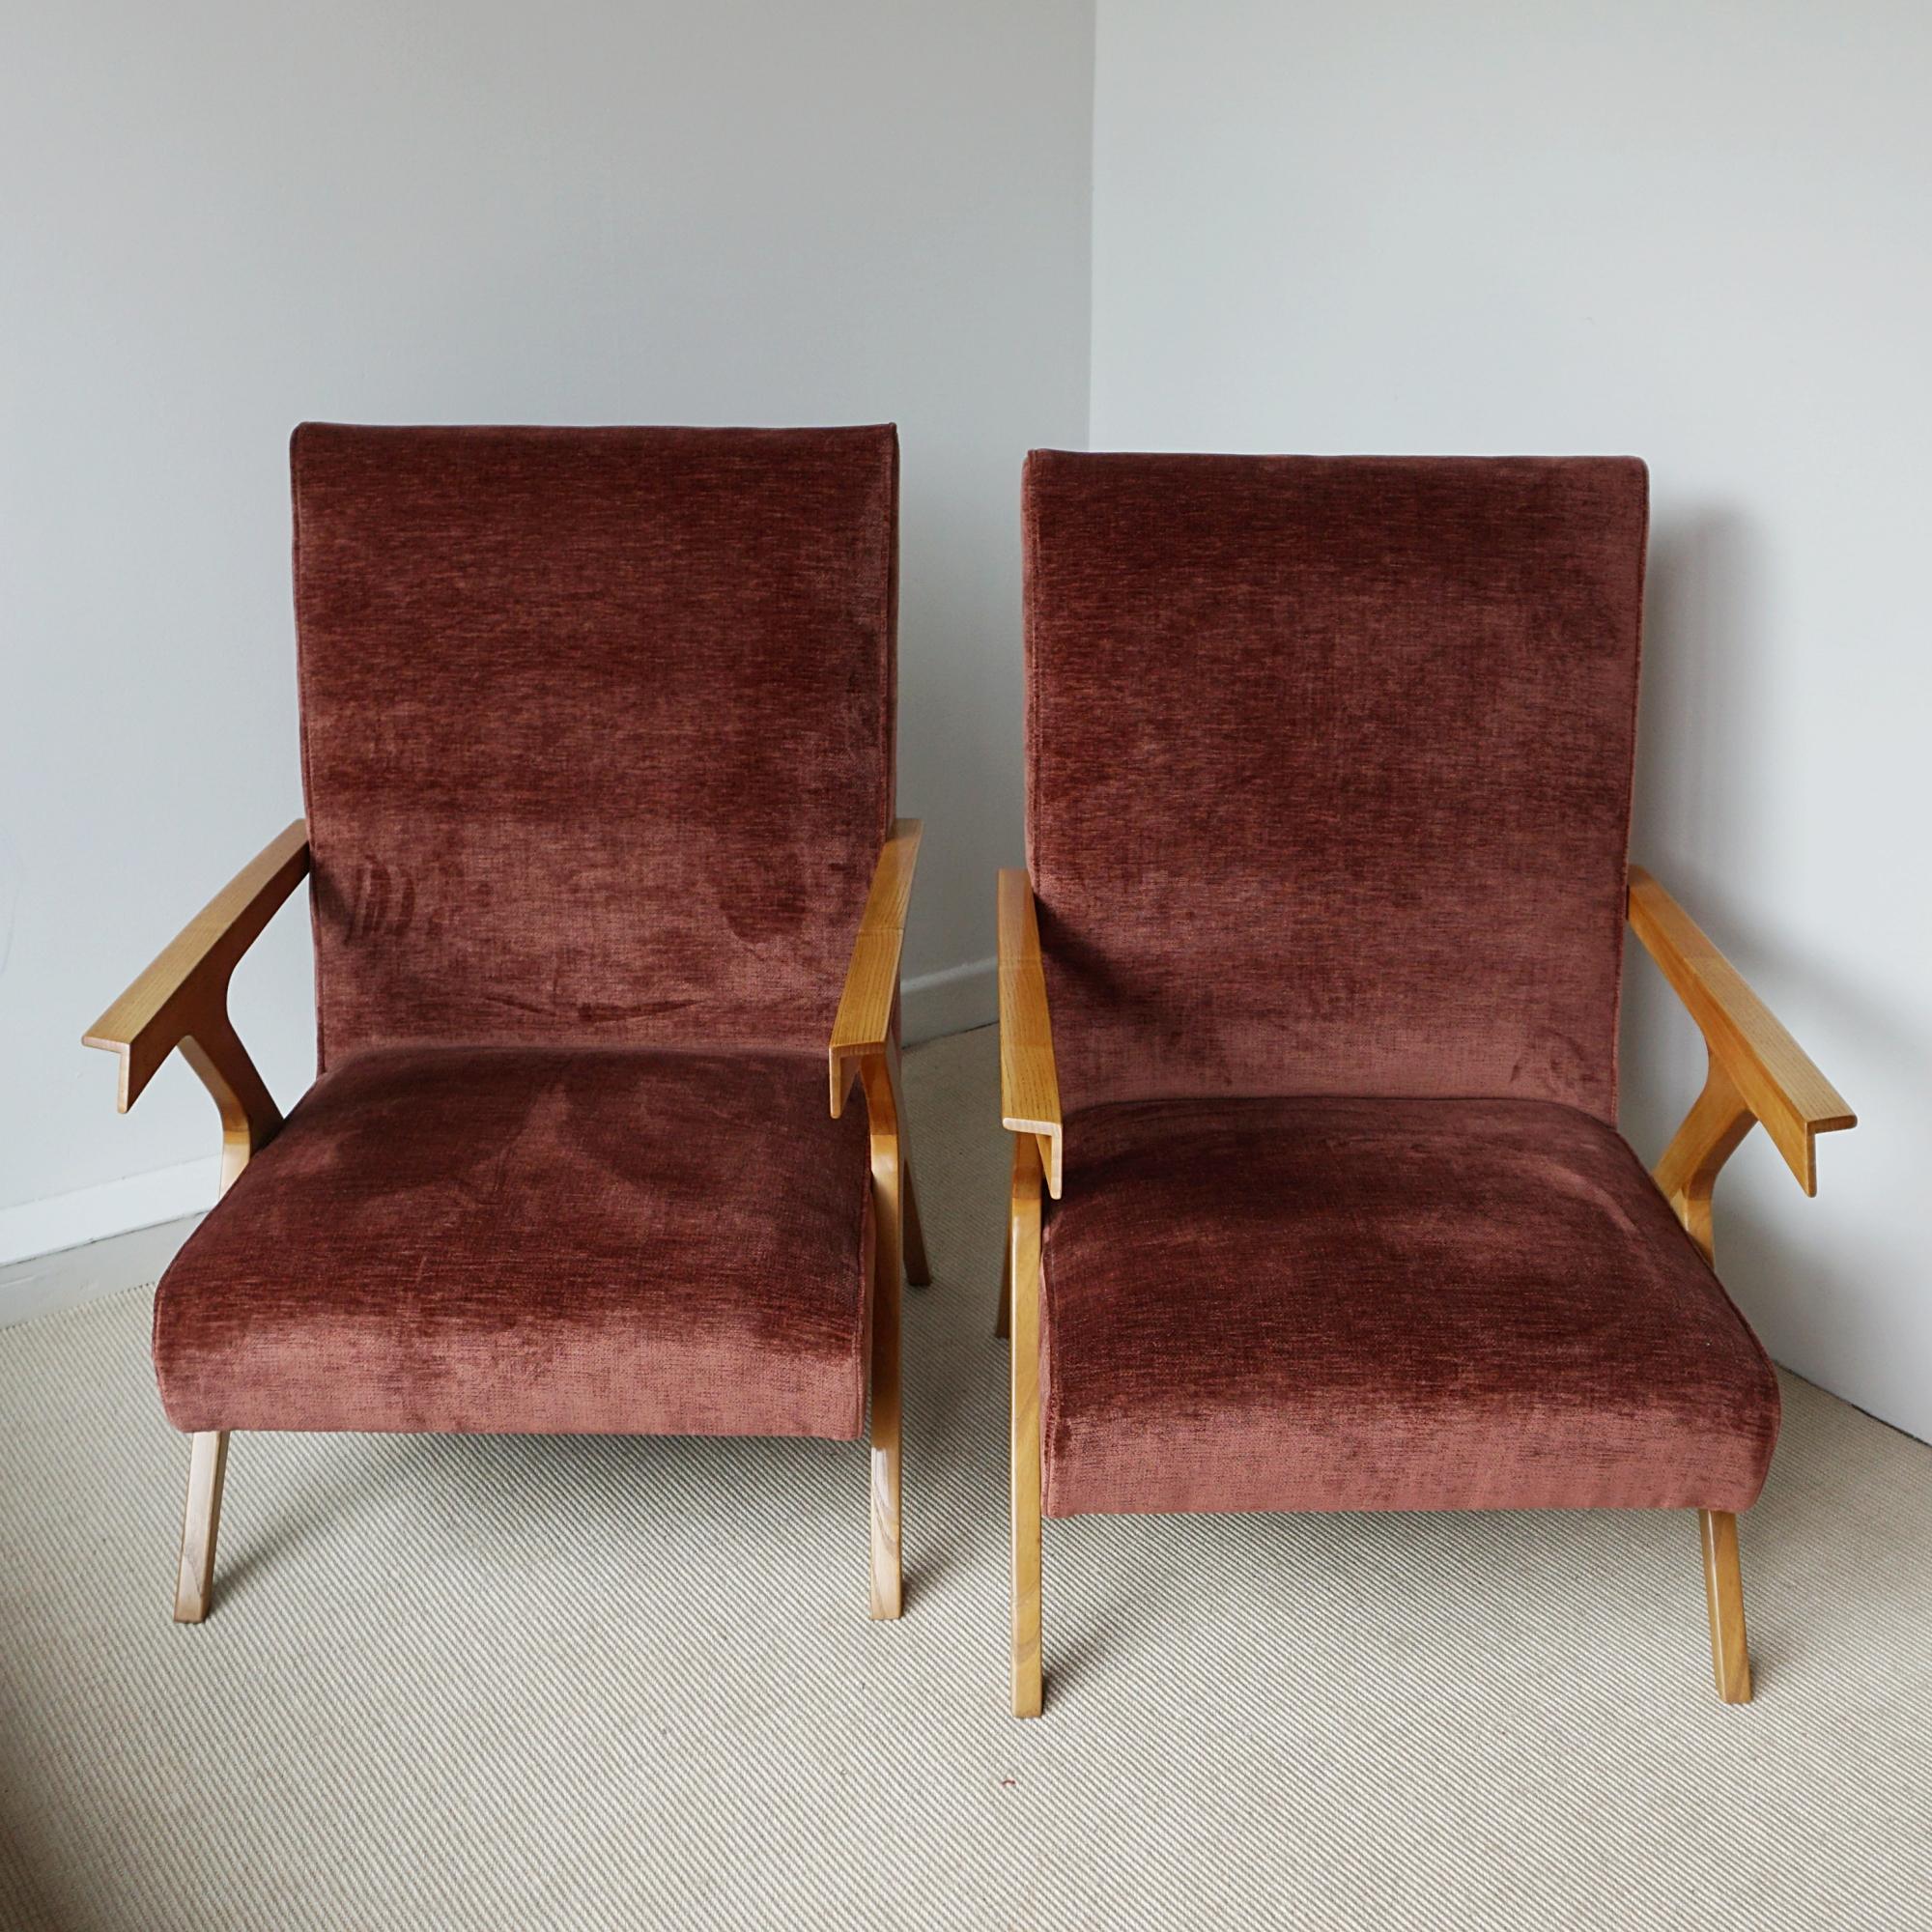 A pair of mid-century armchairs attributed to Antonio Gorgone. Solid Elm angular frame with a brick red frabric re-upholstery. 

Dimensions: H 95cm W 65cm D 68cm Seat H 36cm W 57cm D 52cm

Origin: Italian

Date: Circa 1950

Item Number: 2604242

All